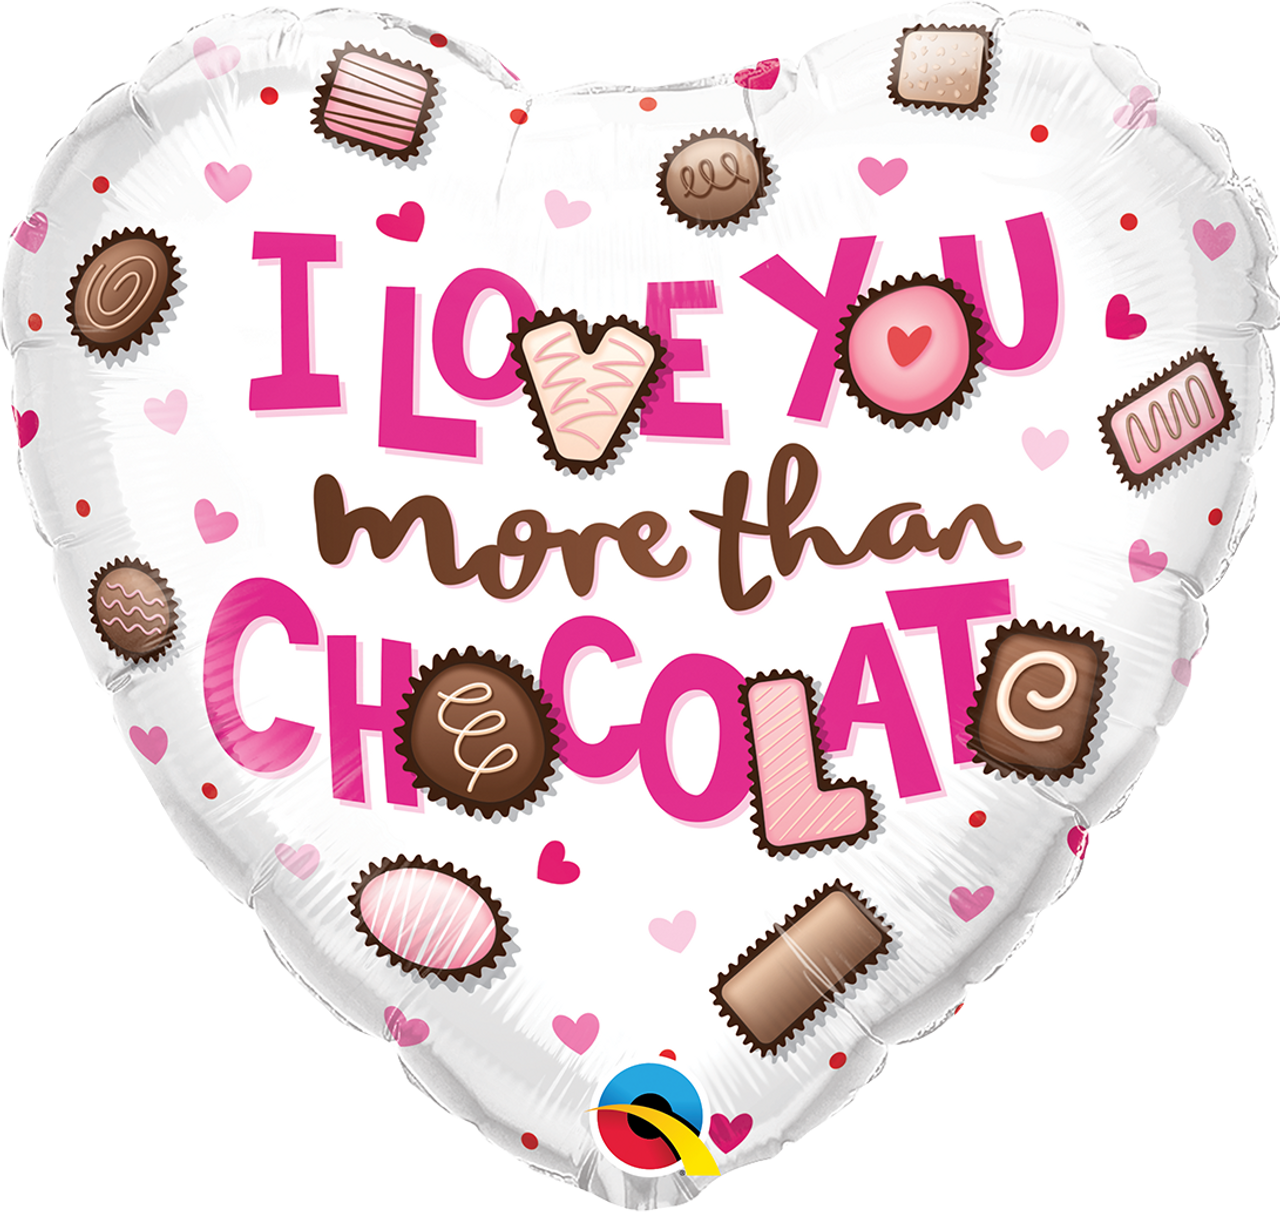 I Love You More Than Chocolate Foil balloon 18"